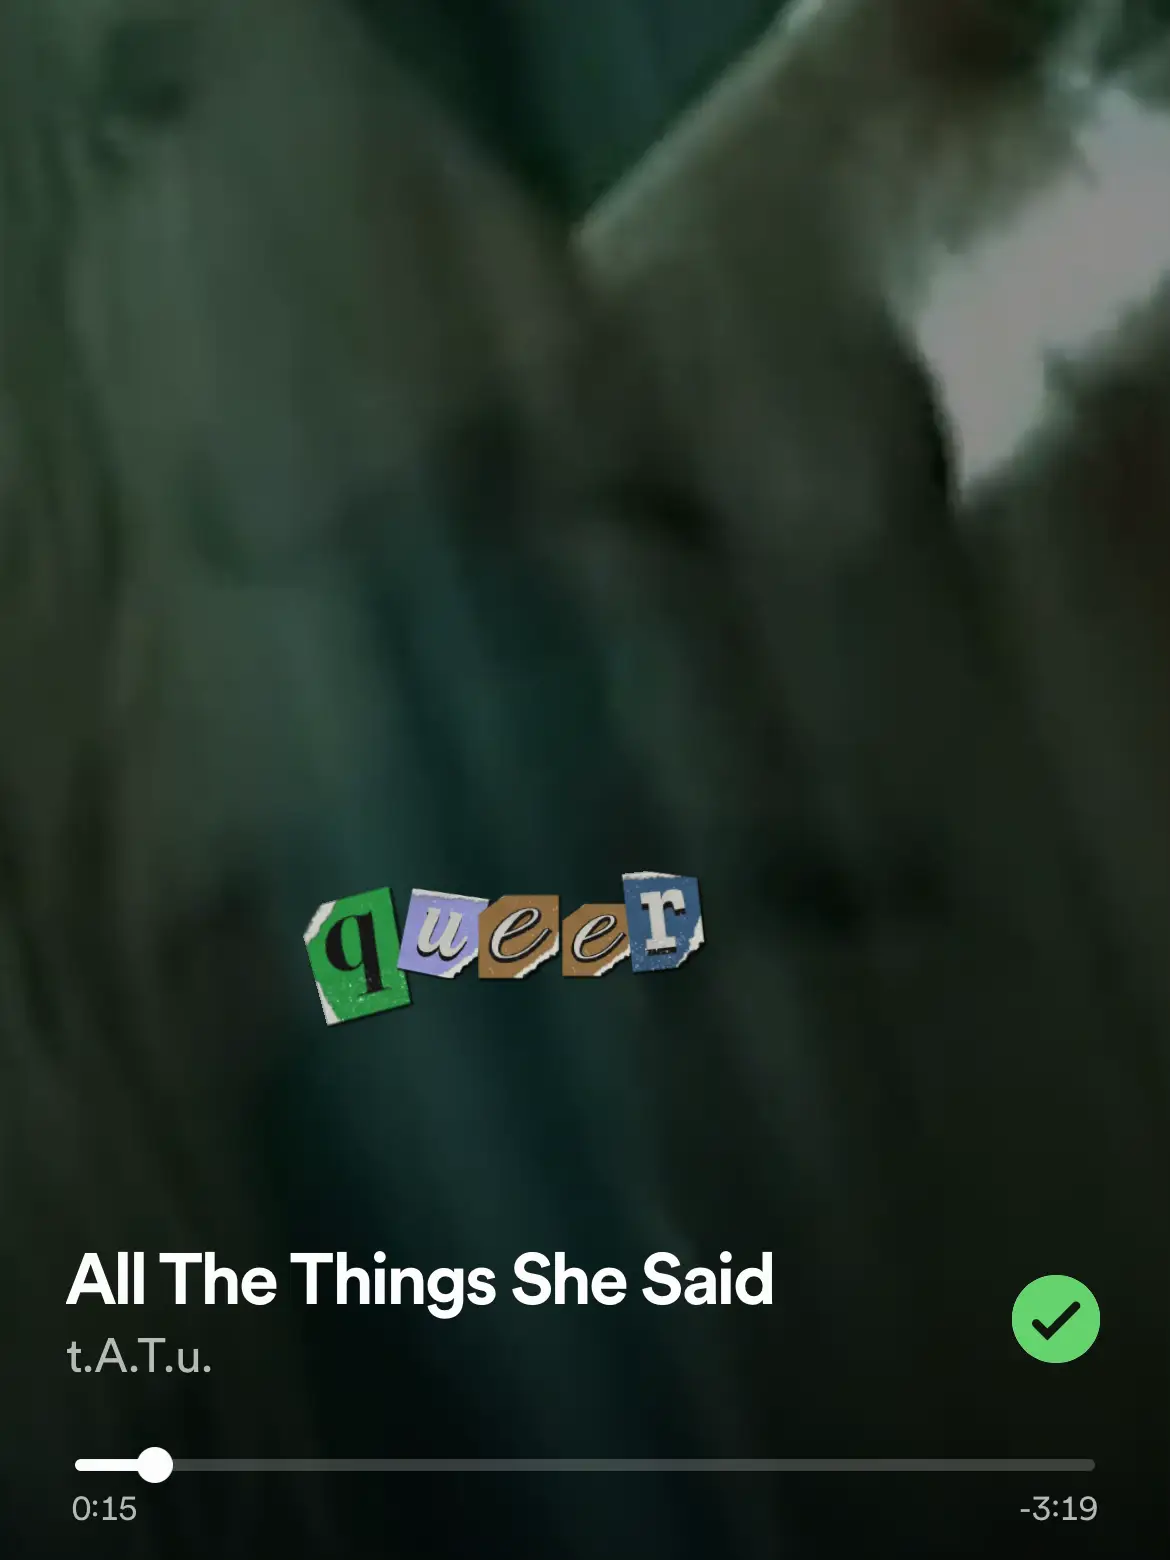  A song with the words "All the things she said" at the top.